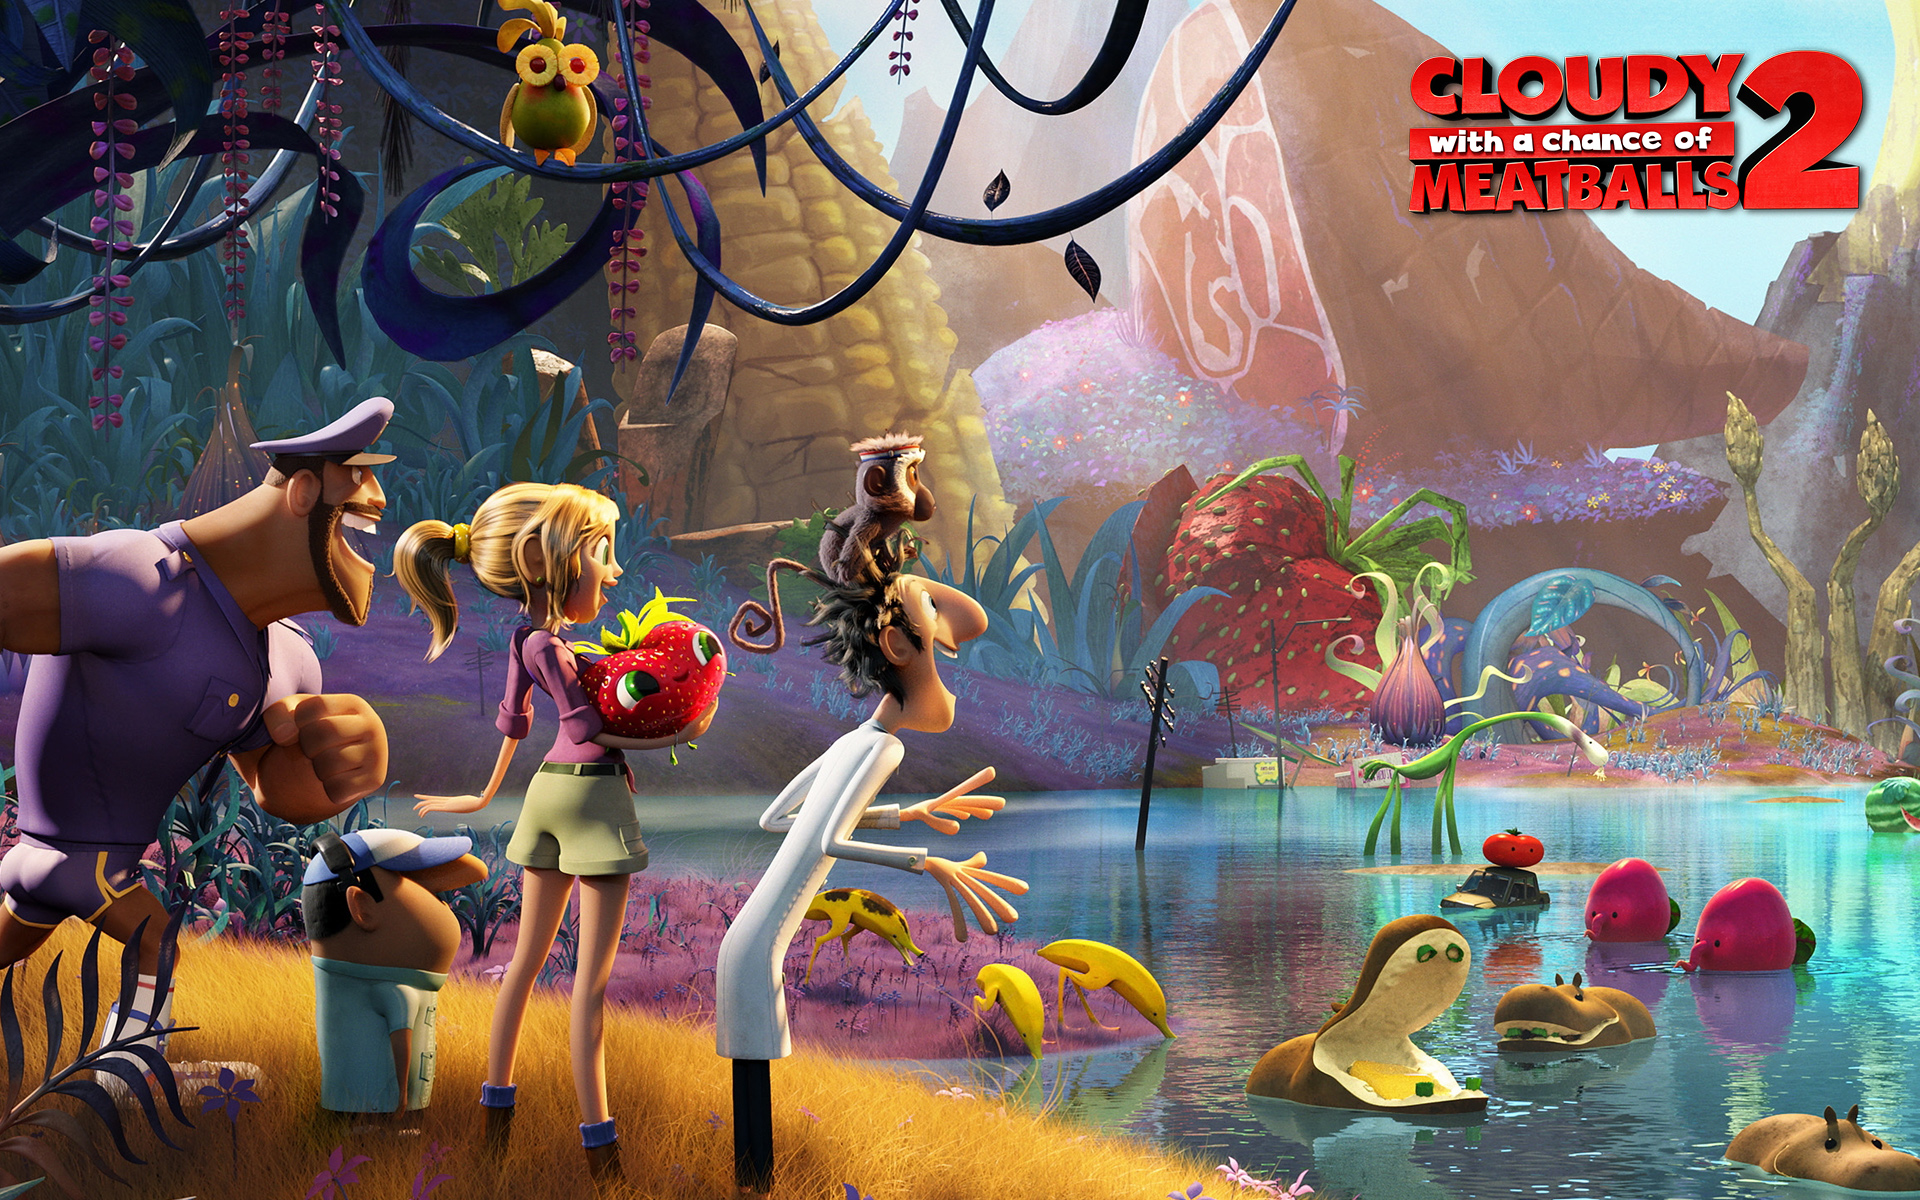 Cloudy With A Chance Of Meatballs 2 HD wallpapers, Desktop wallpaper - most viewed